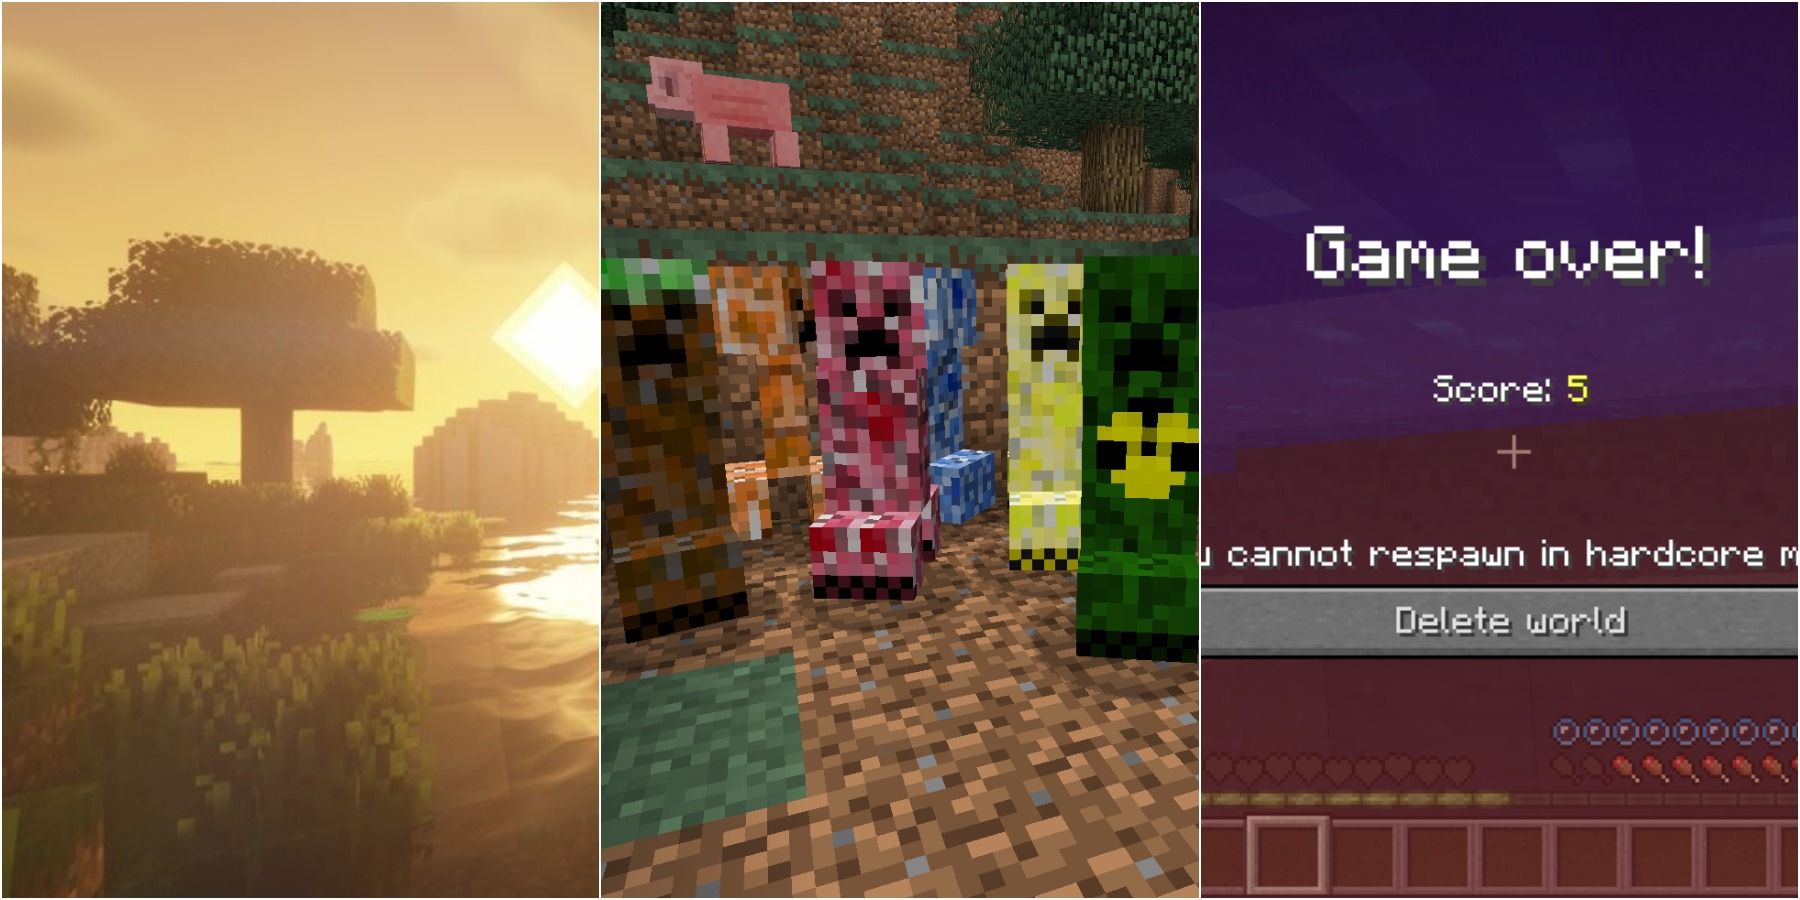 Minecraft split image of sunset, modded creepers, game over screen